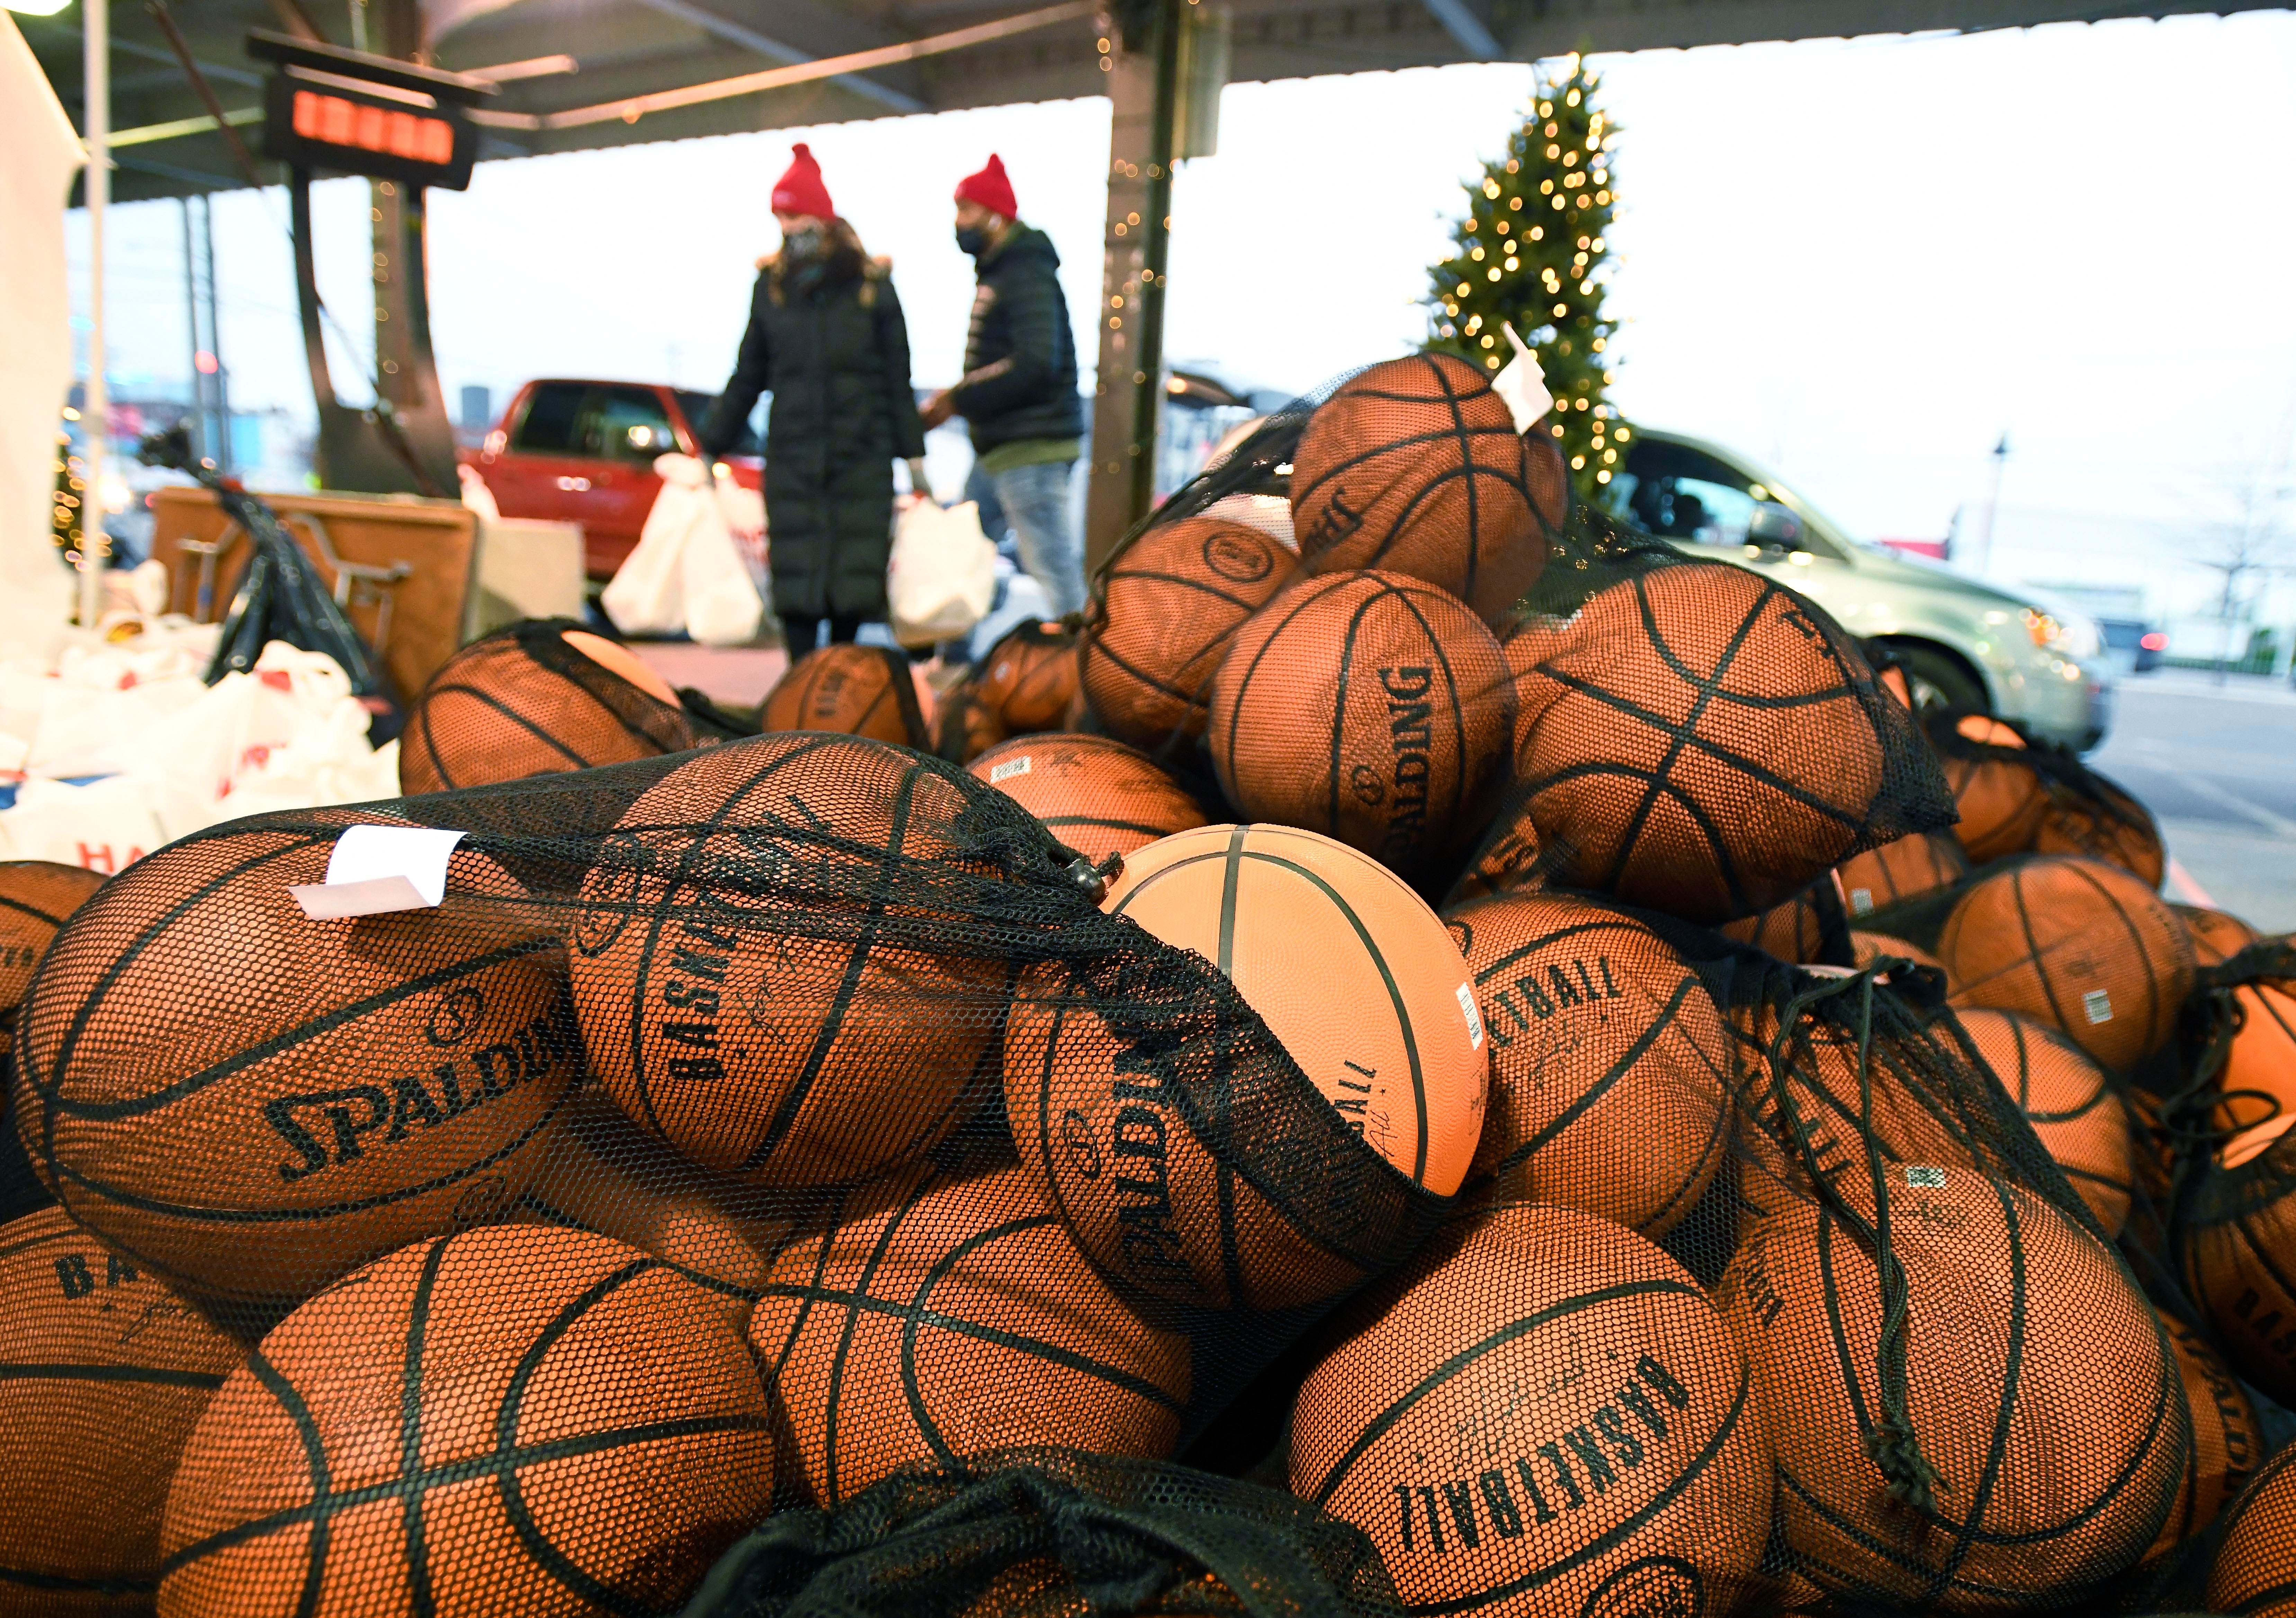 Piston basketballs piled up, soon to be dibbled, shot and dunked by lucky recipients at a drive-through toy pickup in Eastern Market.